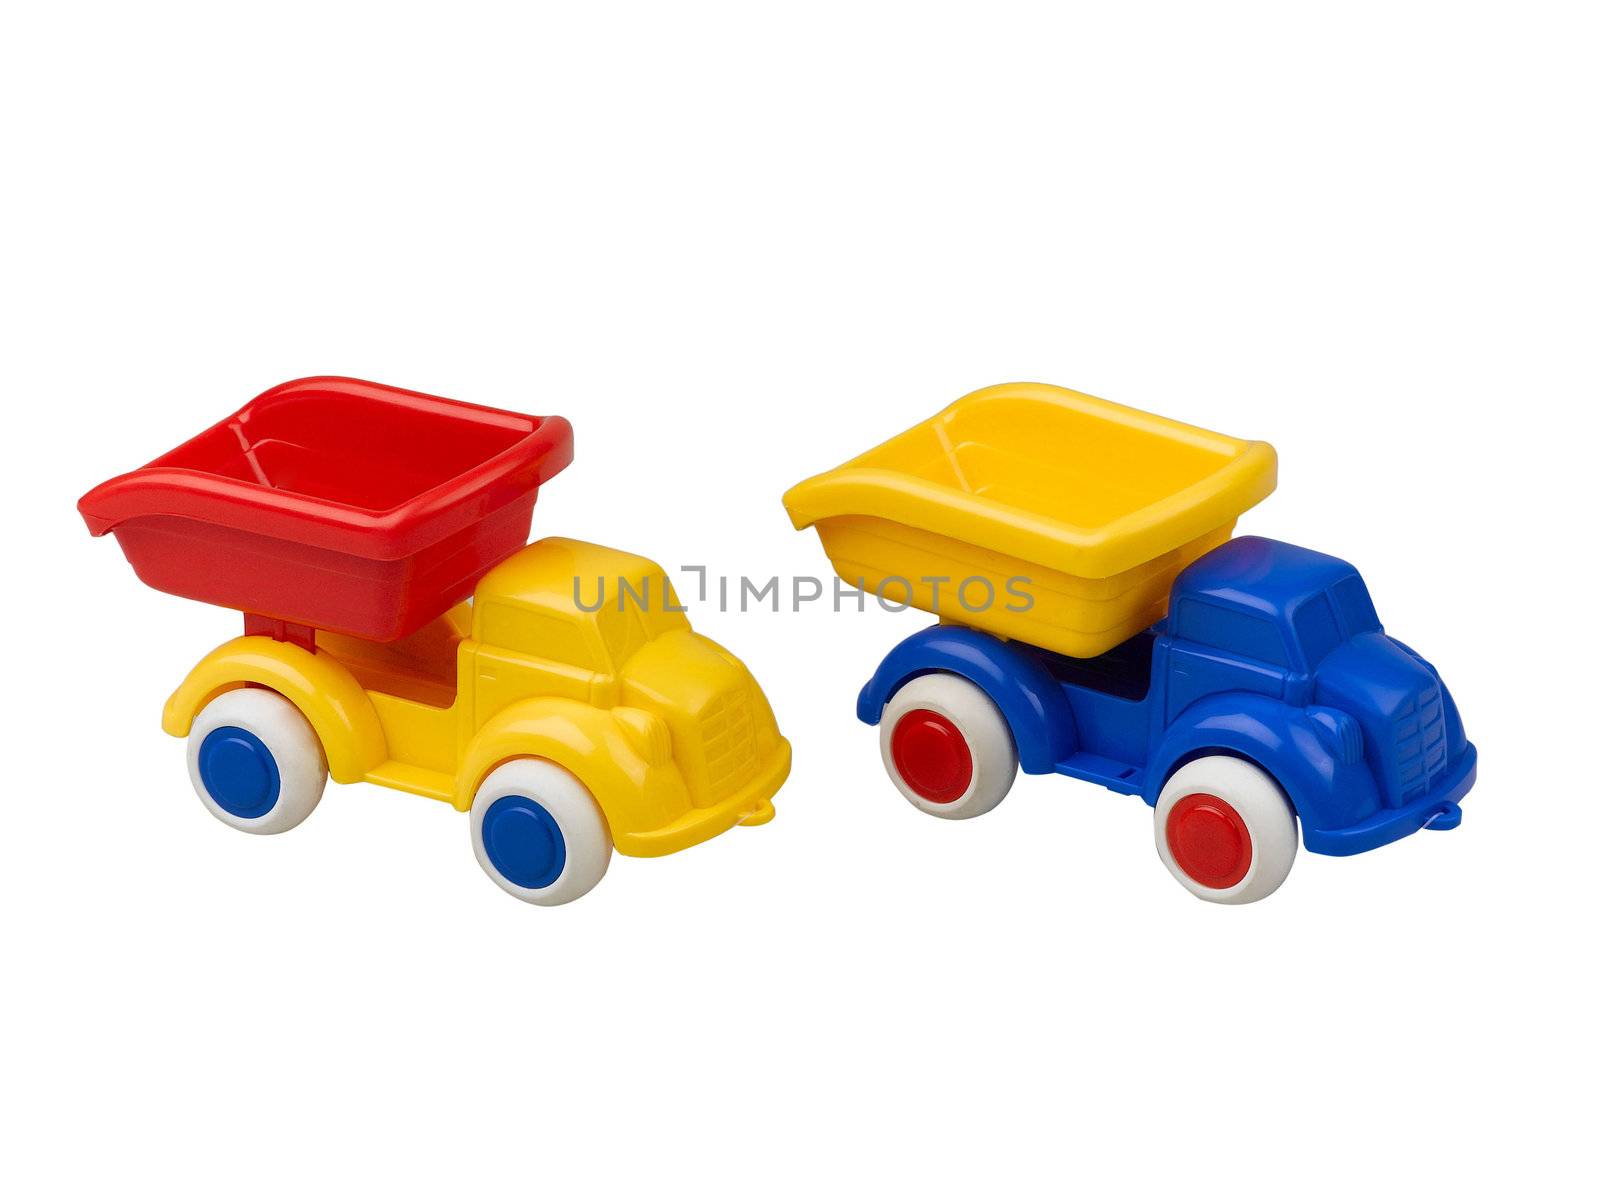 trucks plastic toy for kids to have fun with there learning